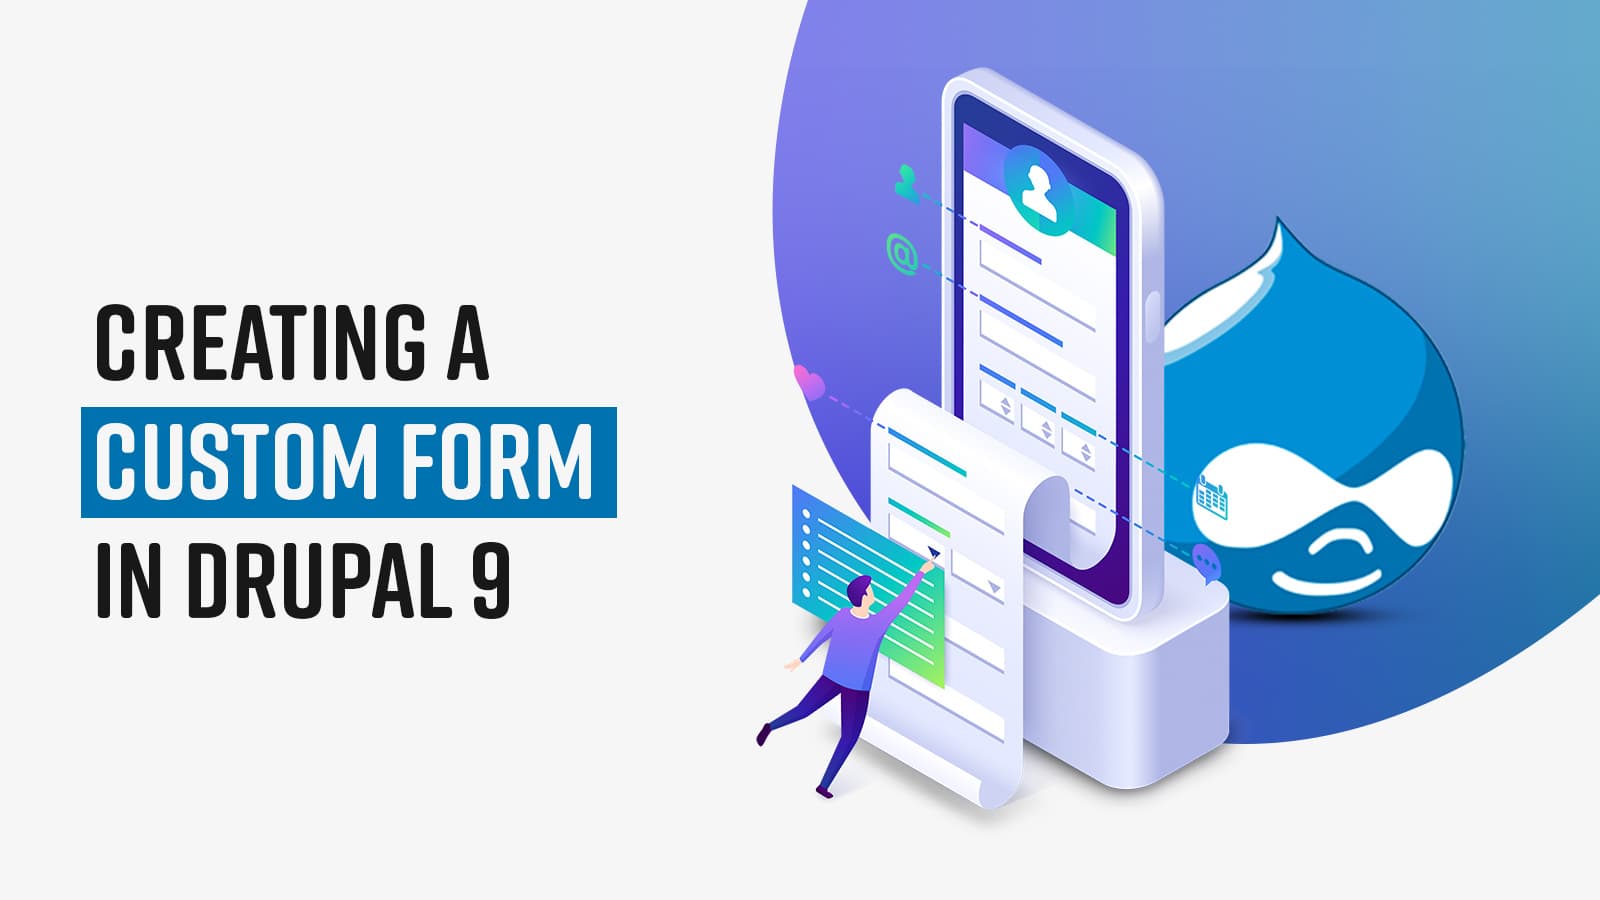 Learn how to create custom forms to collect data from different source in Drupal 9